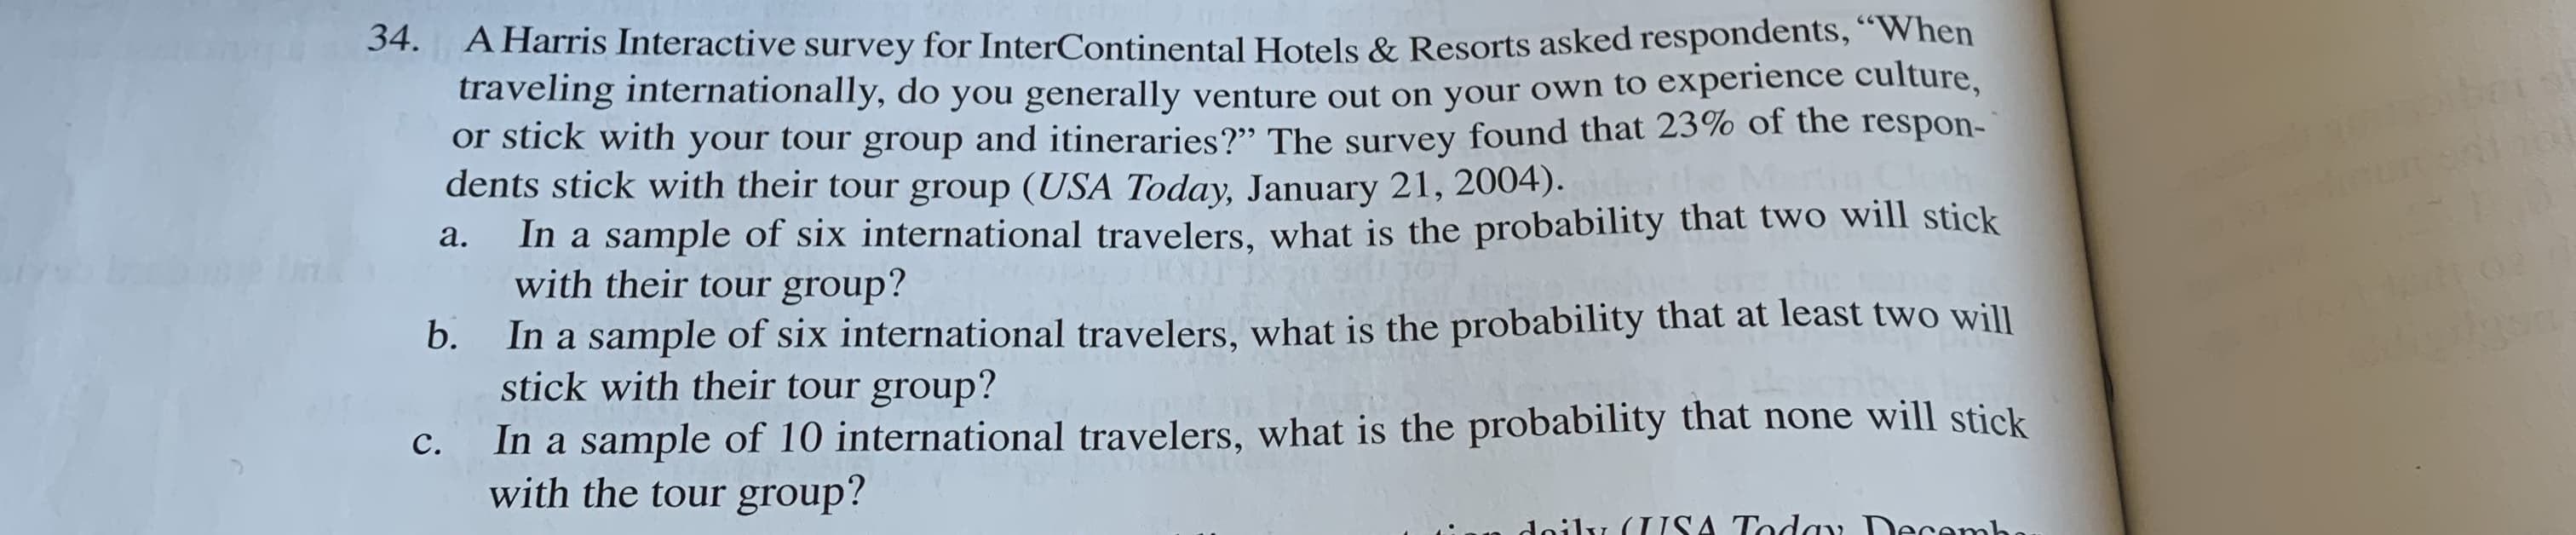 A Harris Interactive survey for InterContinental Hotels & Resorts asked respondents,"When
traveling internationally, do you generally venture out on your own to experience culture,
or stick with your tour group and itineraries?" The survey found that 23% of the respon-
dents stick with their tour group (USA Today, January 21, 2004).
In a sample of six international travelers., what is the probability that two will stick
with their tour group?
34
а.
In a sample of six international travelers, what is the probability that at least two will
stick with their tour group?
b.
In a sample of 10 international travelers, what is the probability that none will stick
with the tourgroup?
с.
Aaily (USA Today Decamb
